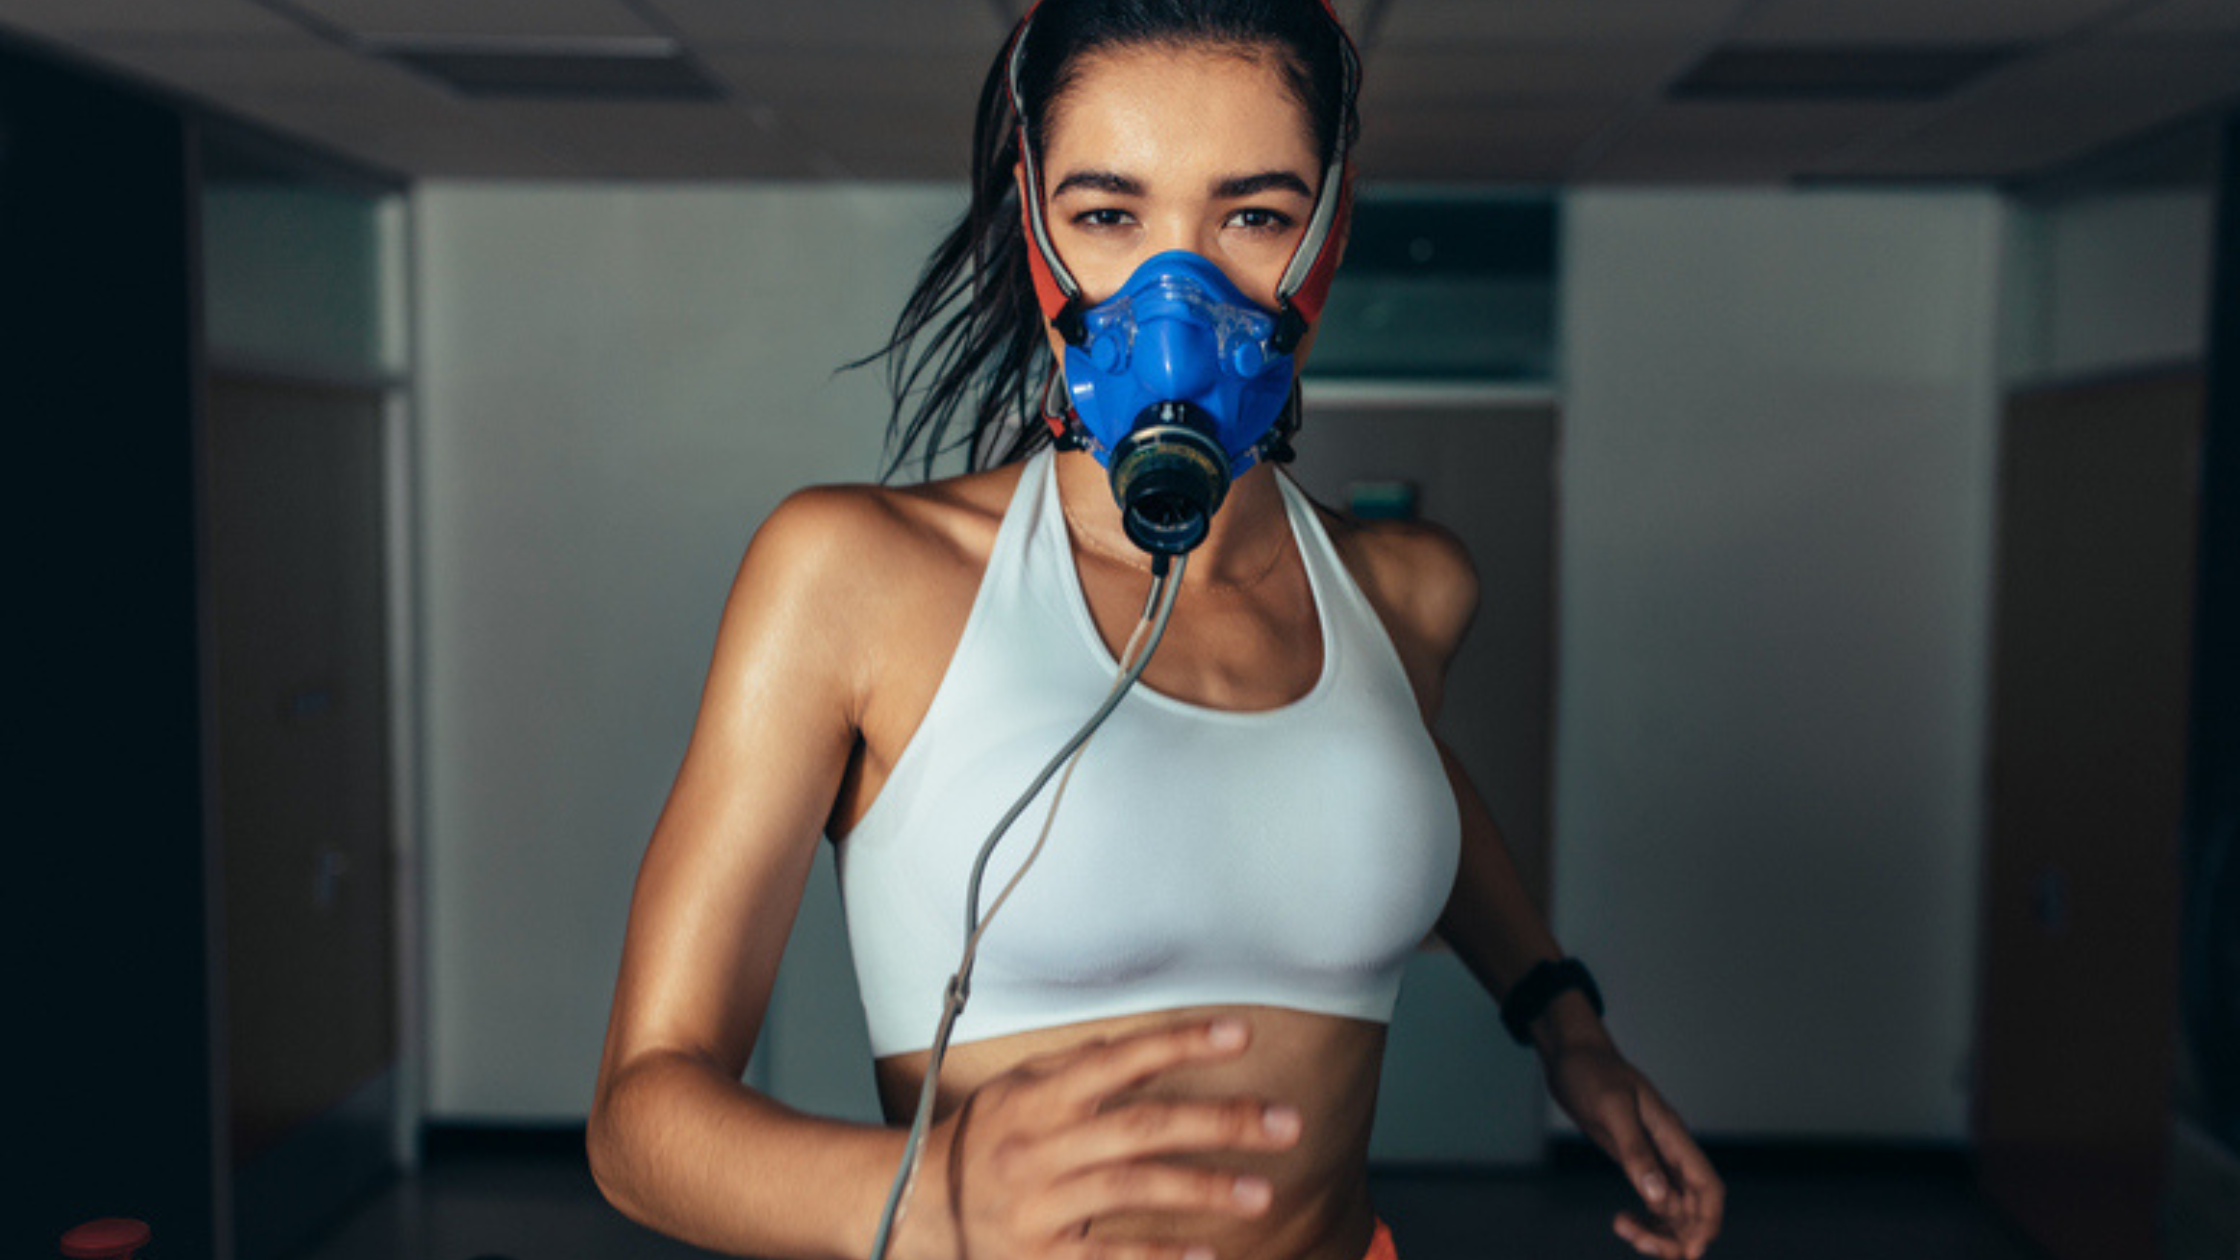 How to increase VO2 Max